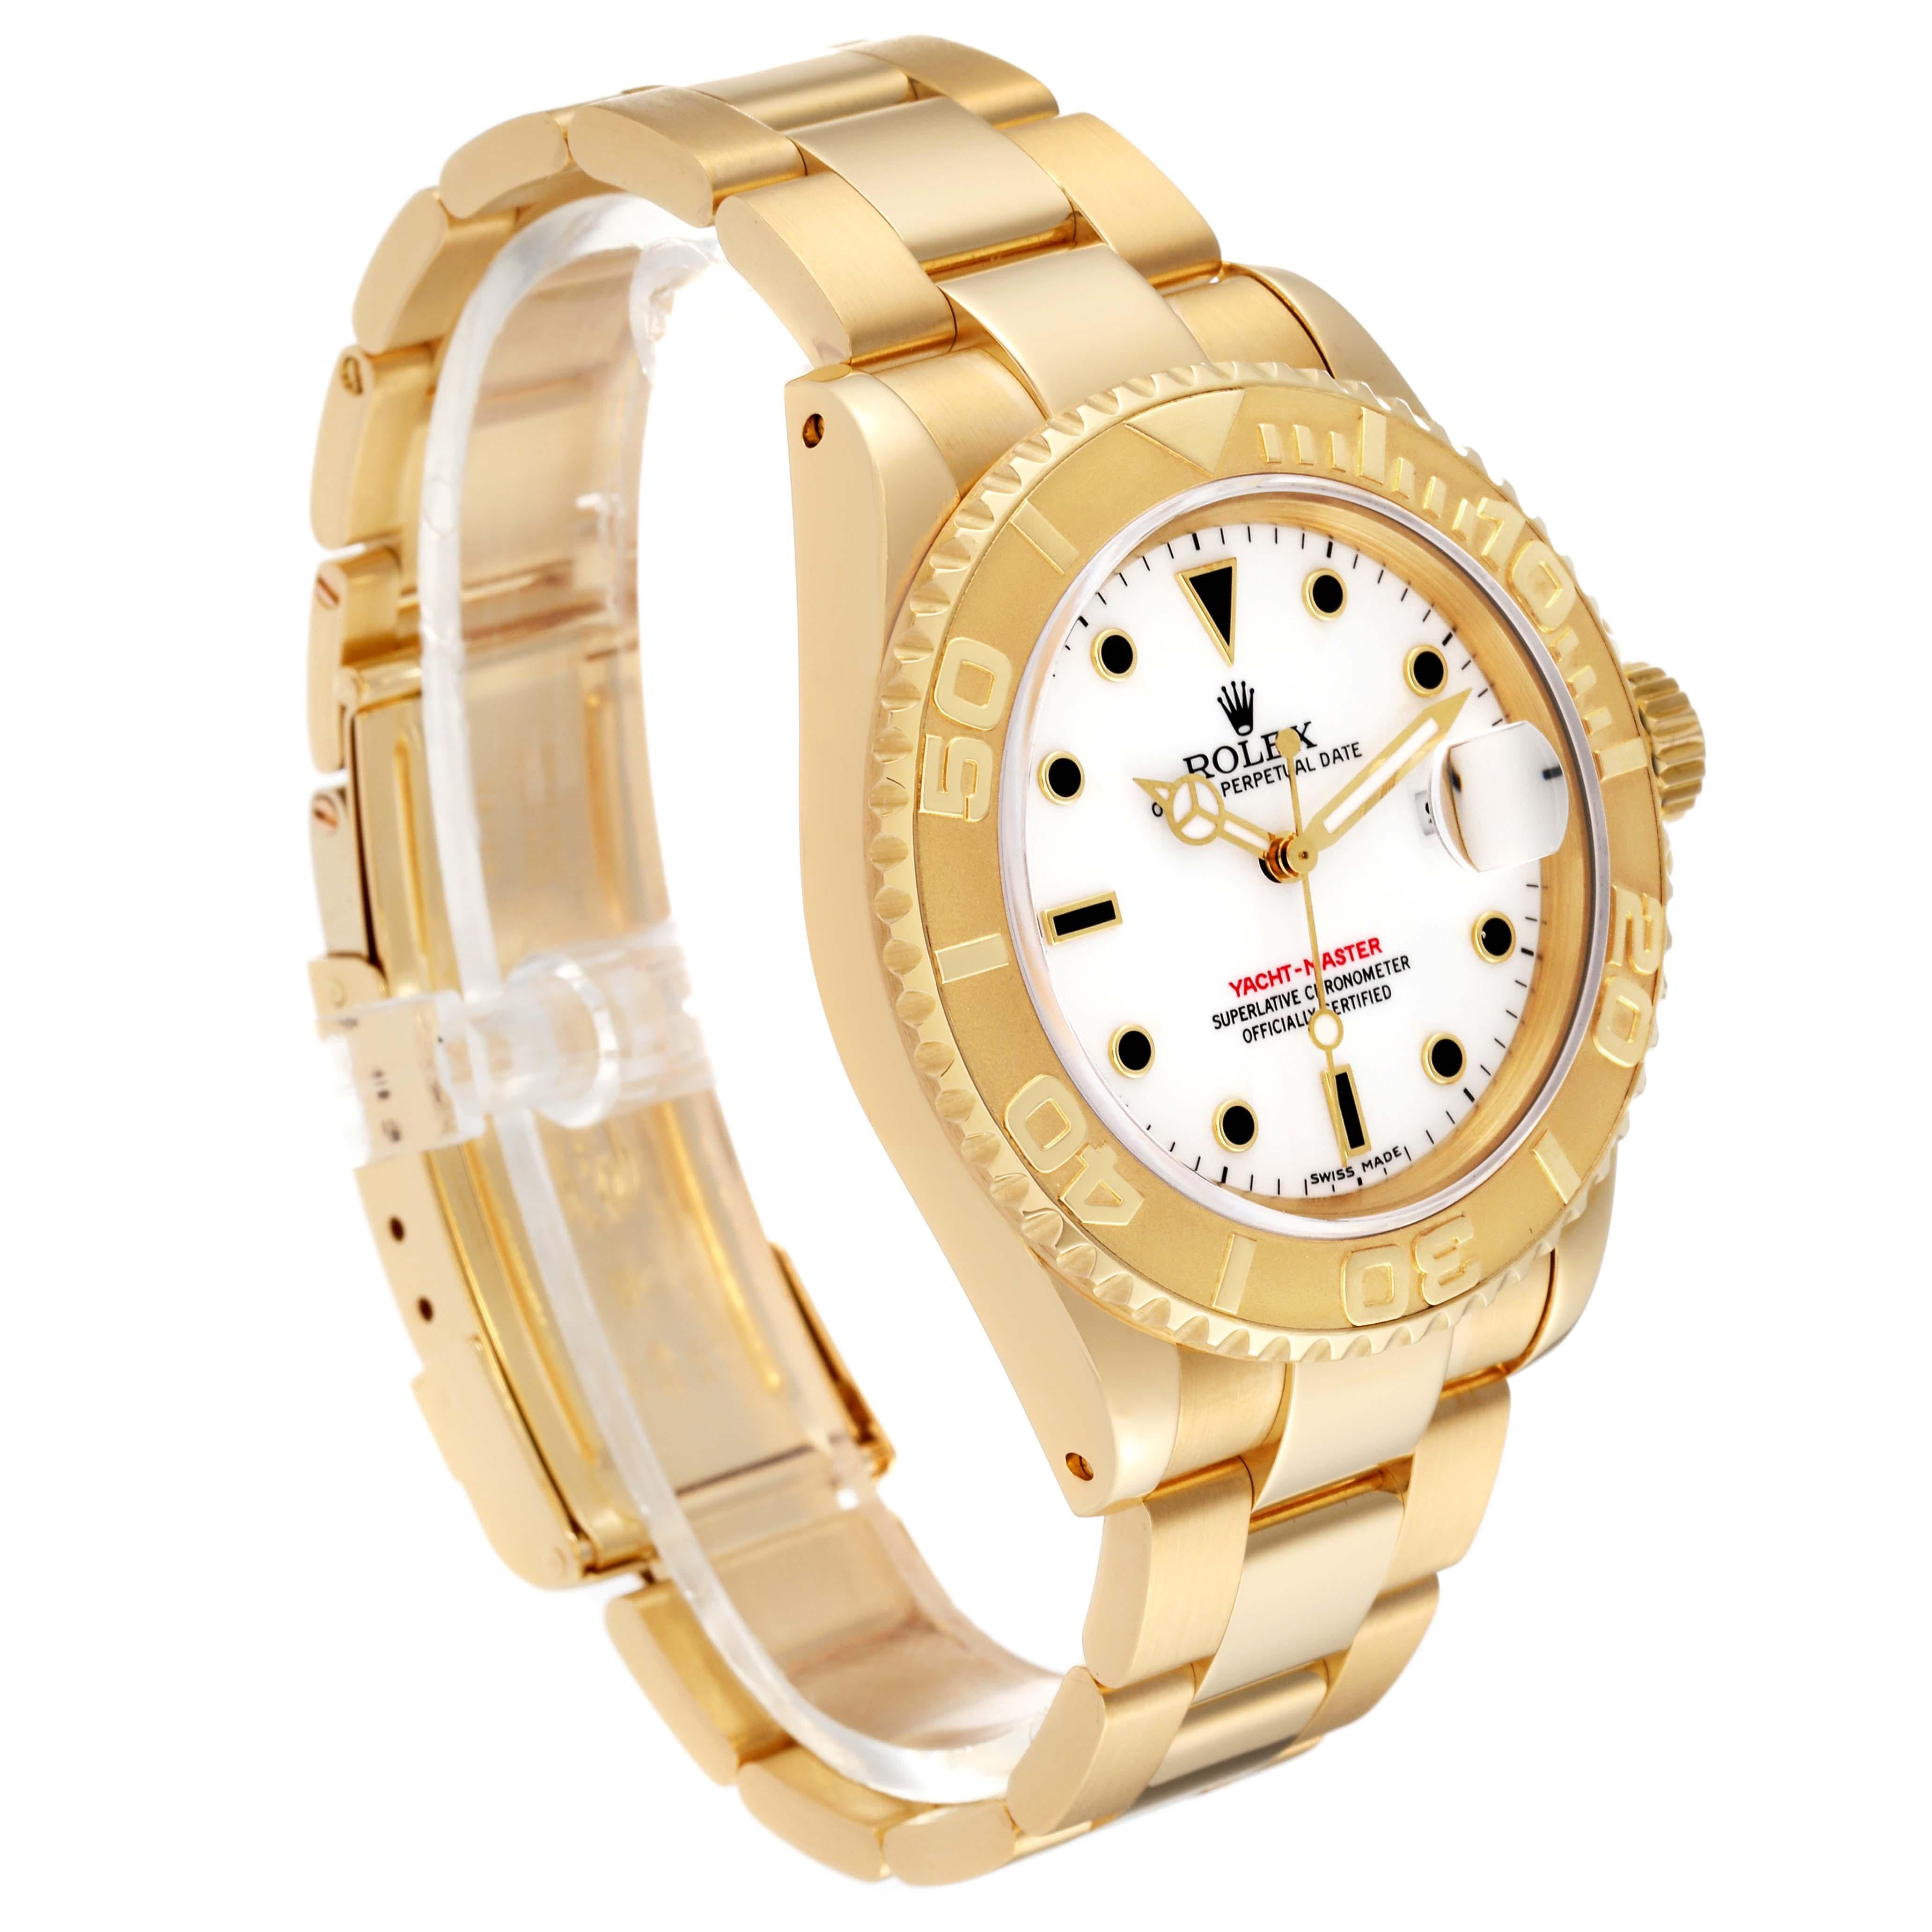 Rolex Yachtmaster 40mm Yellow Gold White Dial Mens Watch 16628 2